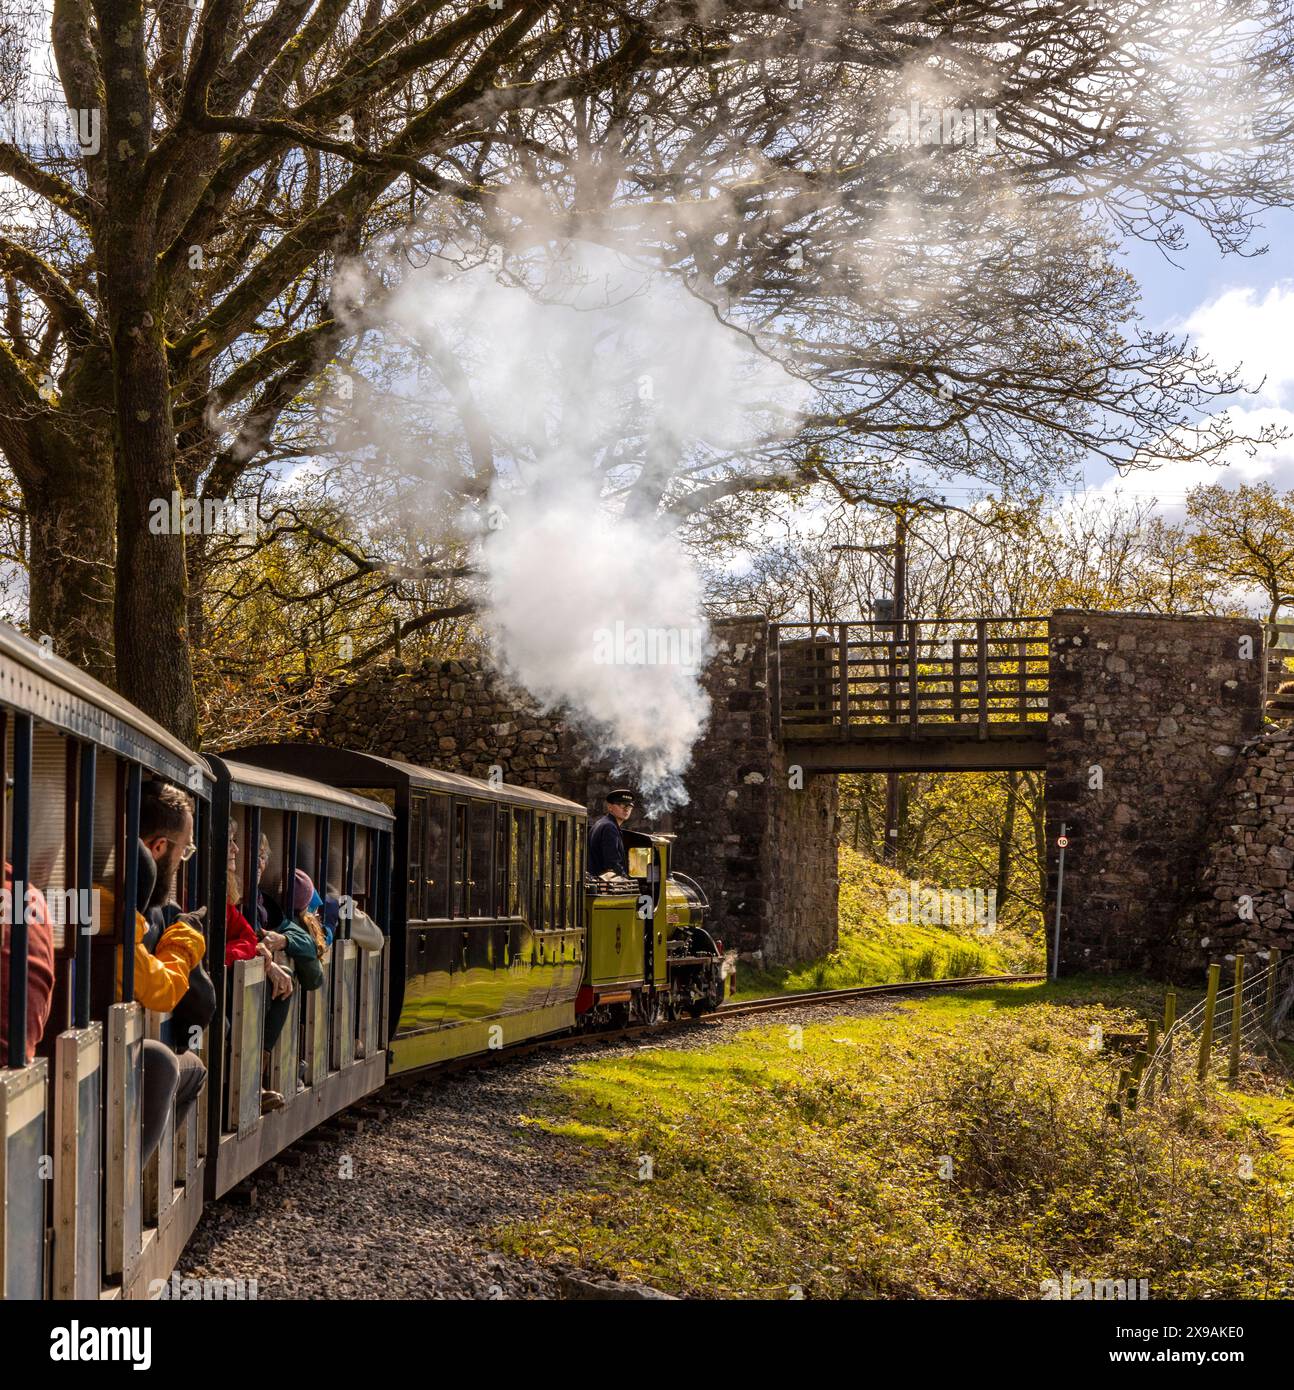 Passengers traveling on the Ravenglass and Eskdale narrow-gauge steam train enjoying the landscape of the Lake District, Cumbria, England Stock Photo